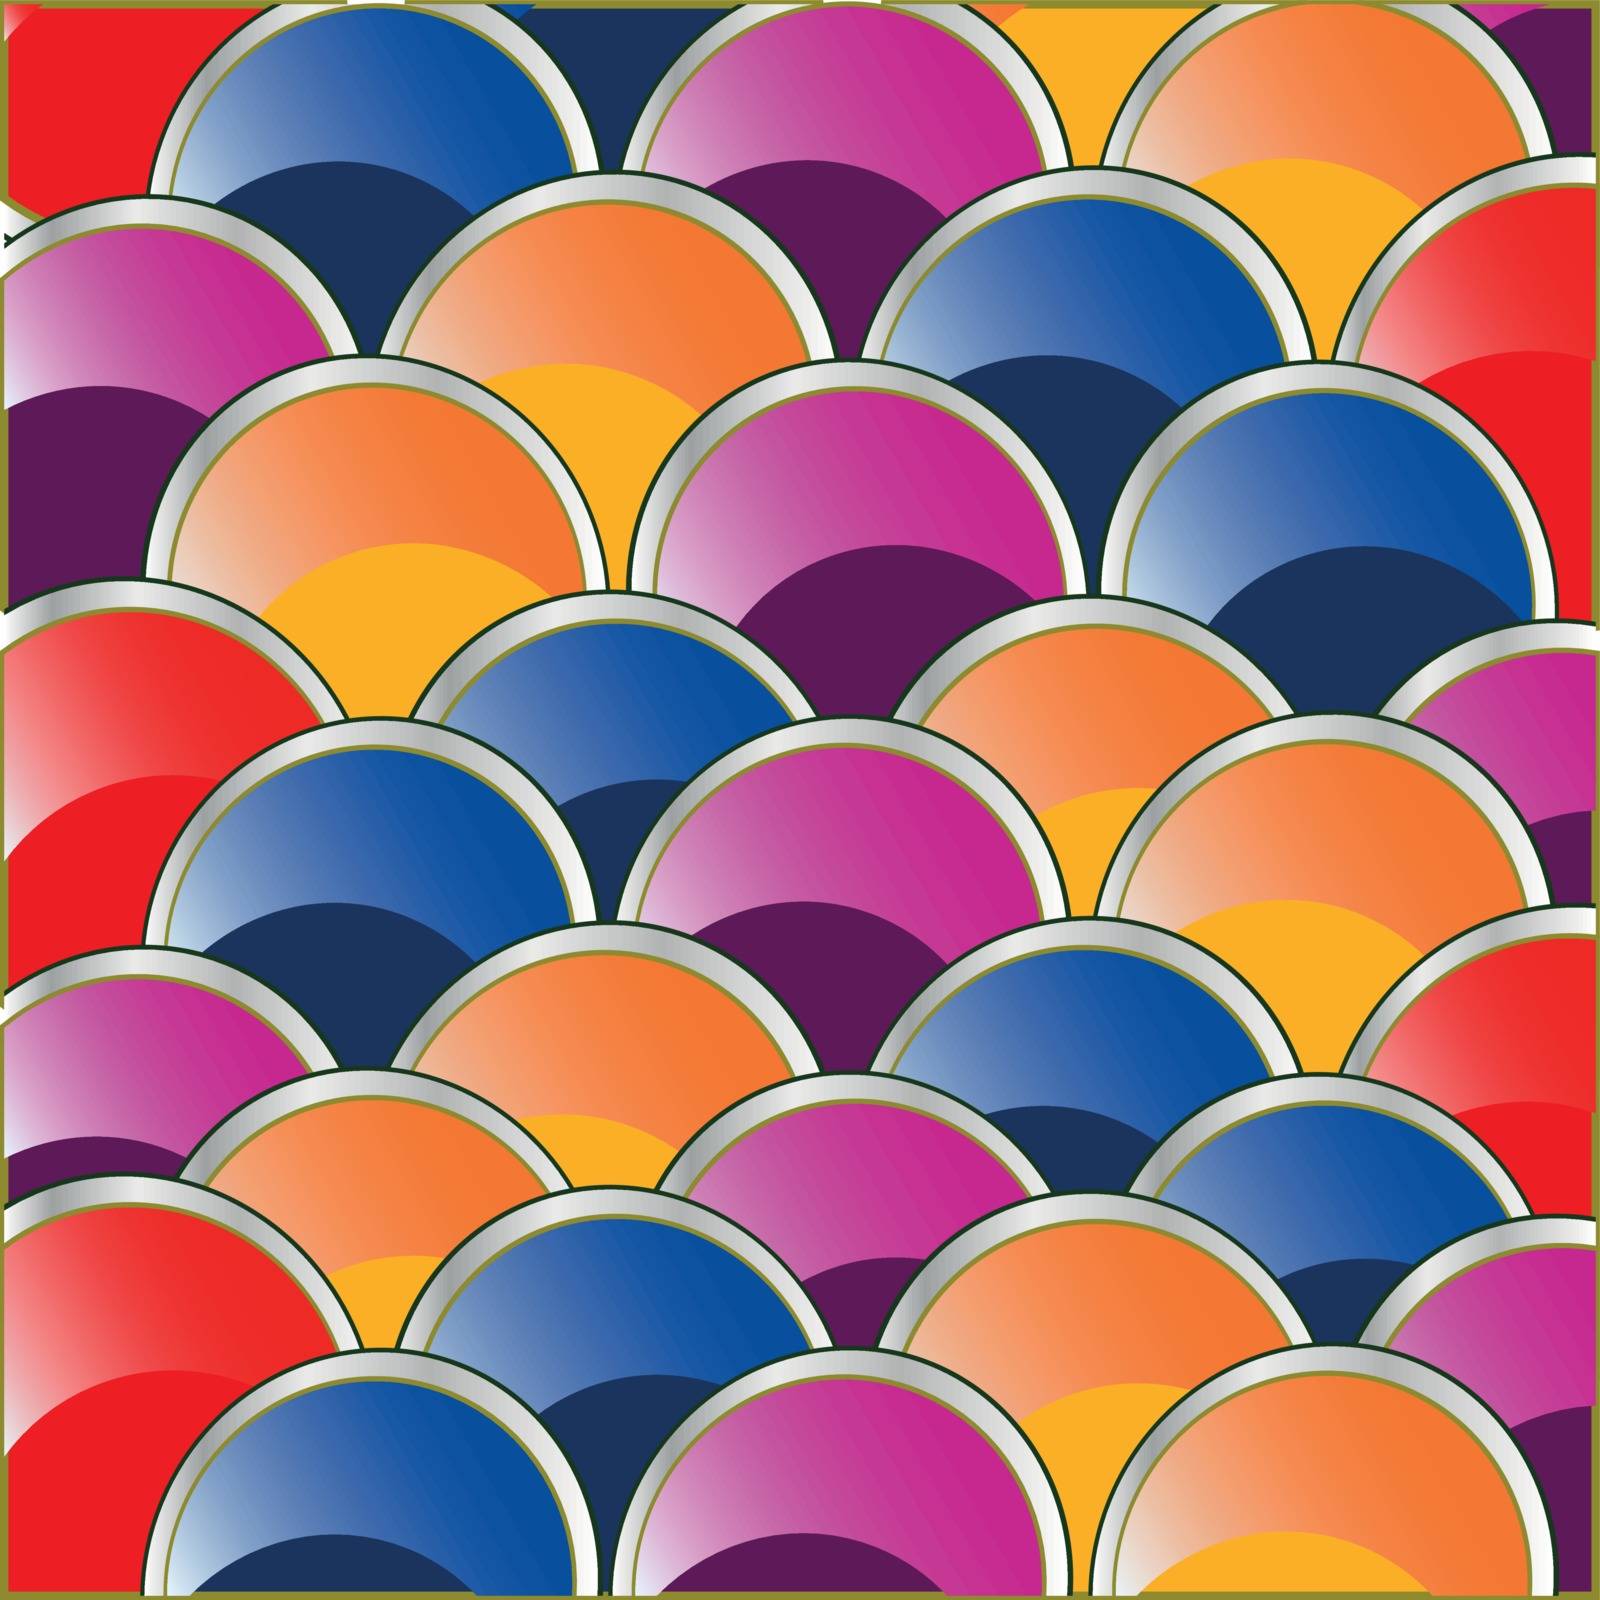 Colour circles by correct rows by cobol1964